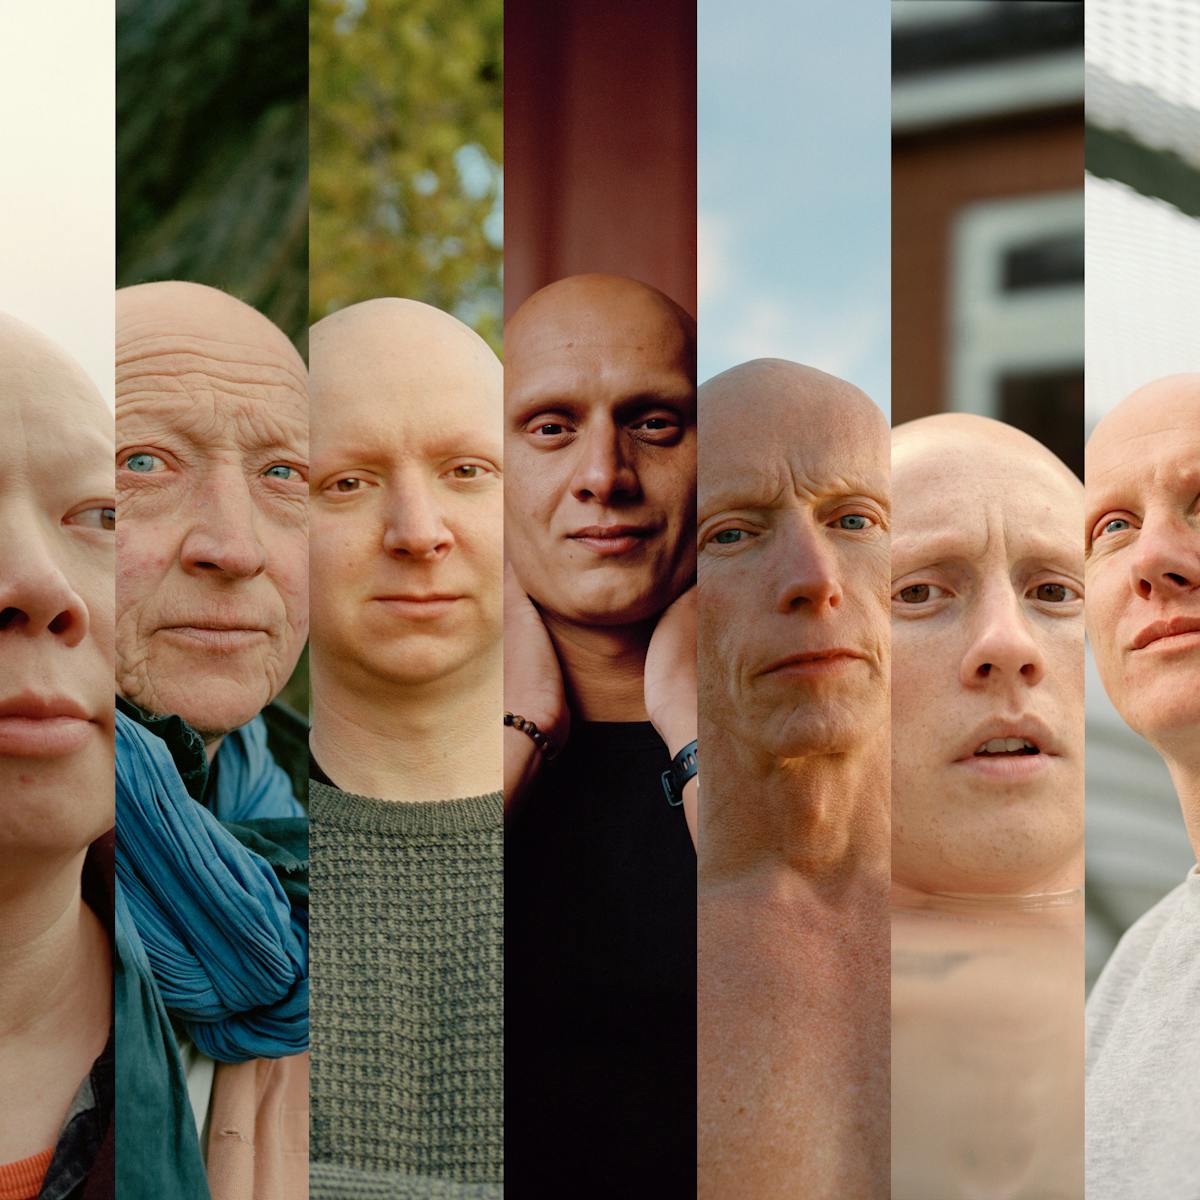 Photographic composite image of 11 portraits featuring men with alopecia universalis.